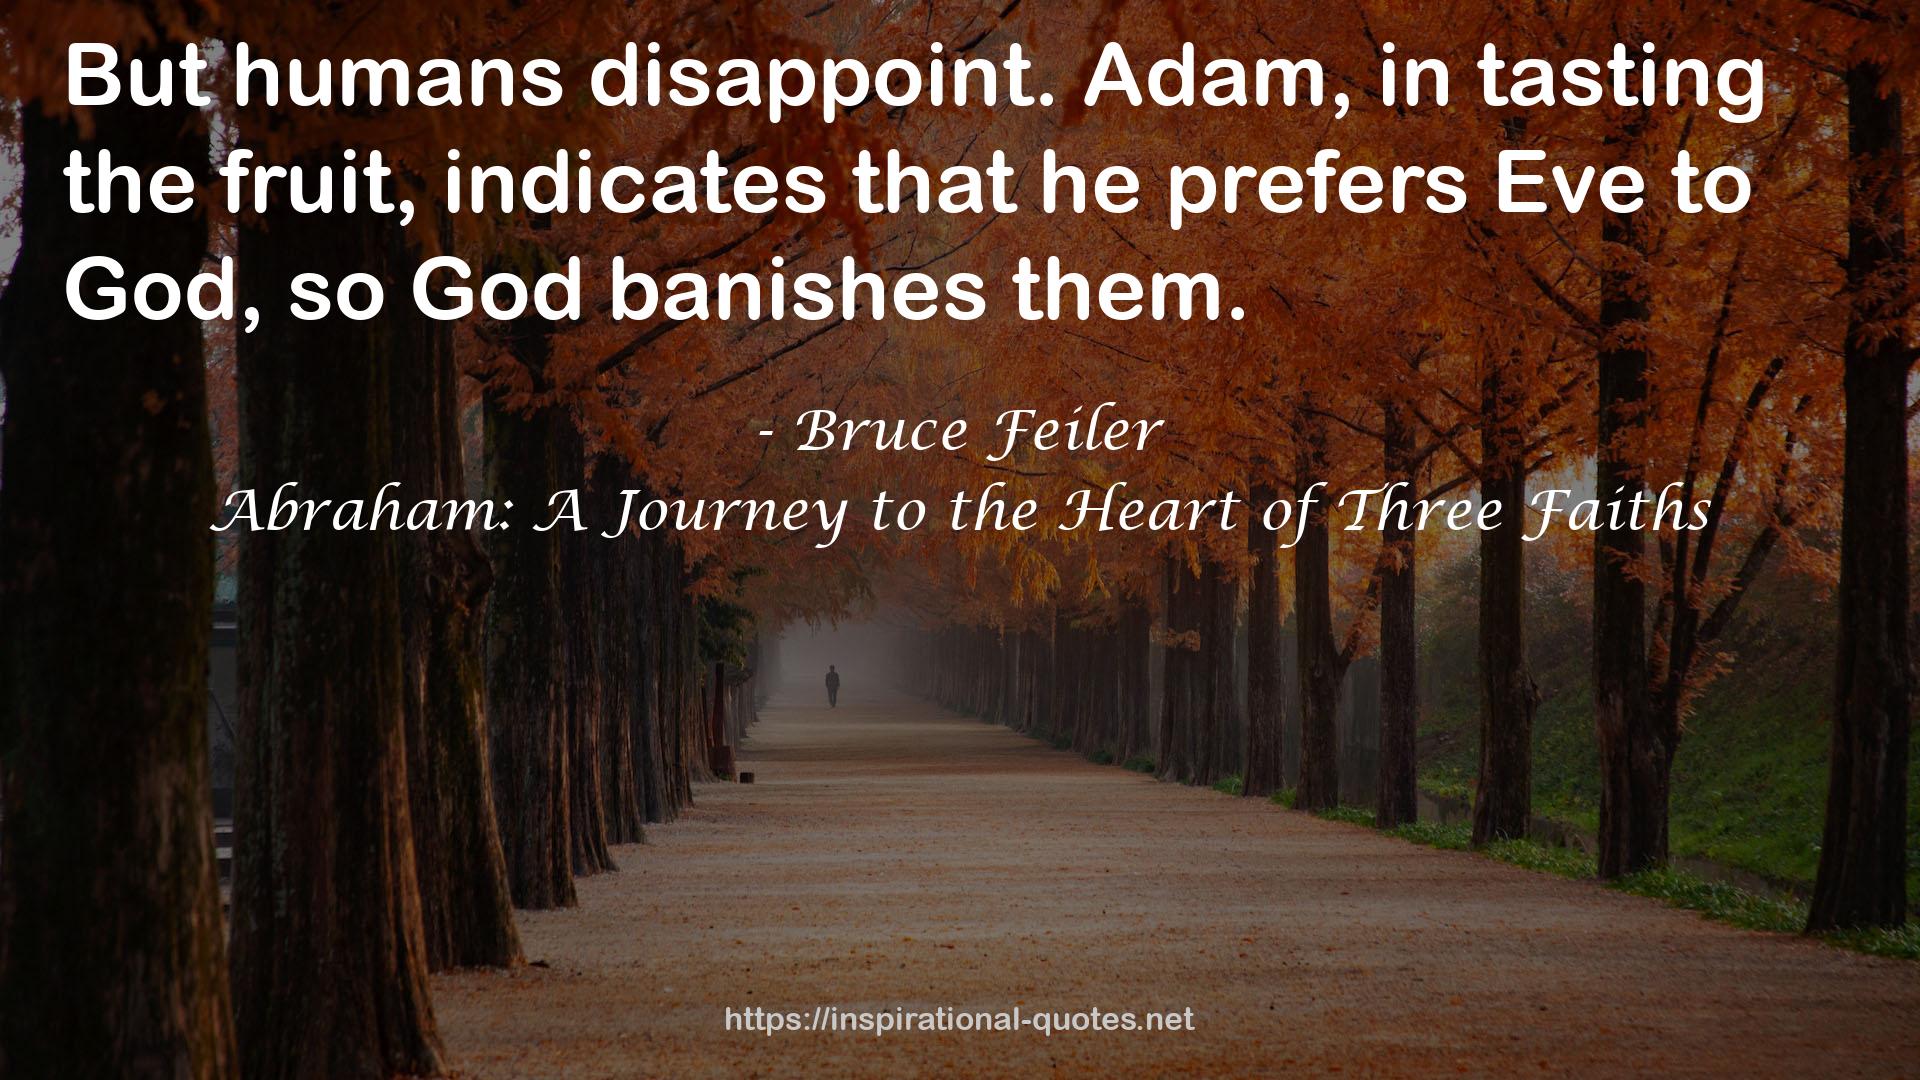 Abraham: A Journey to the Heart of Three Faiths QUOTES